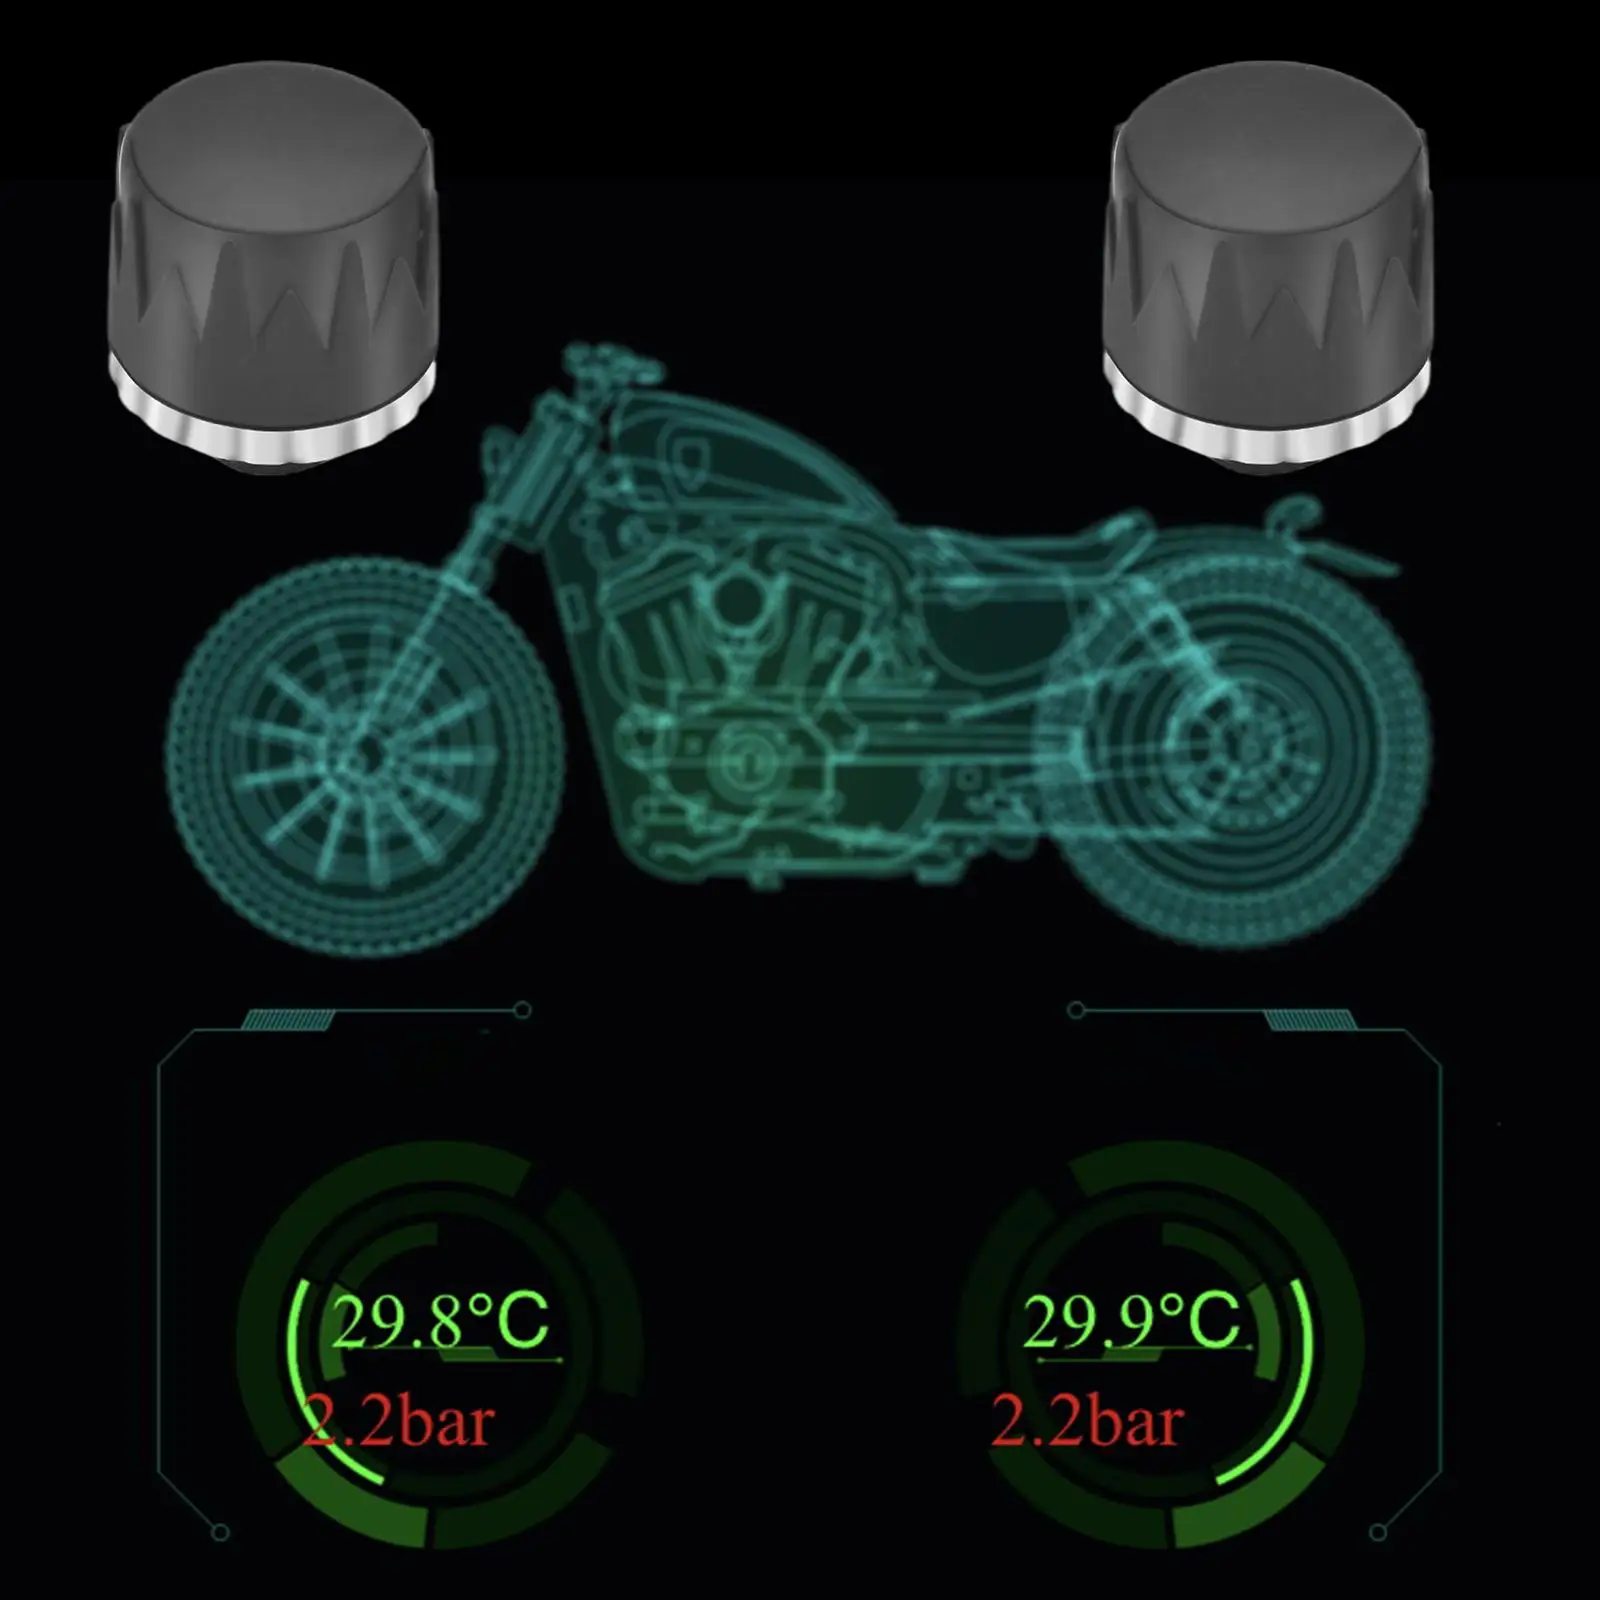 2 Pieces Bluetooth Motorcycle Tire Pressure Monitoring System Sensor TPMS Sensor Battery Voltage Display Fit for Bicycle Motor